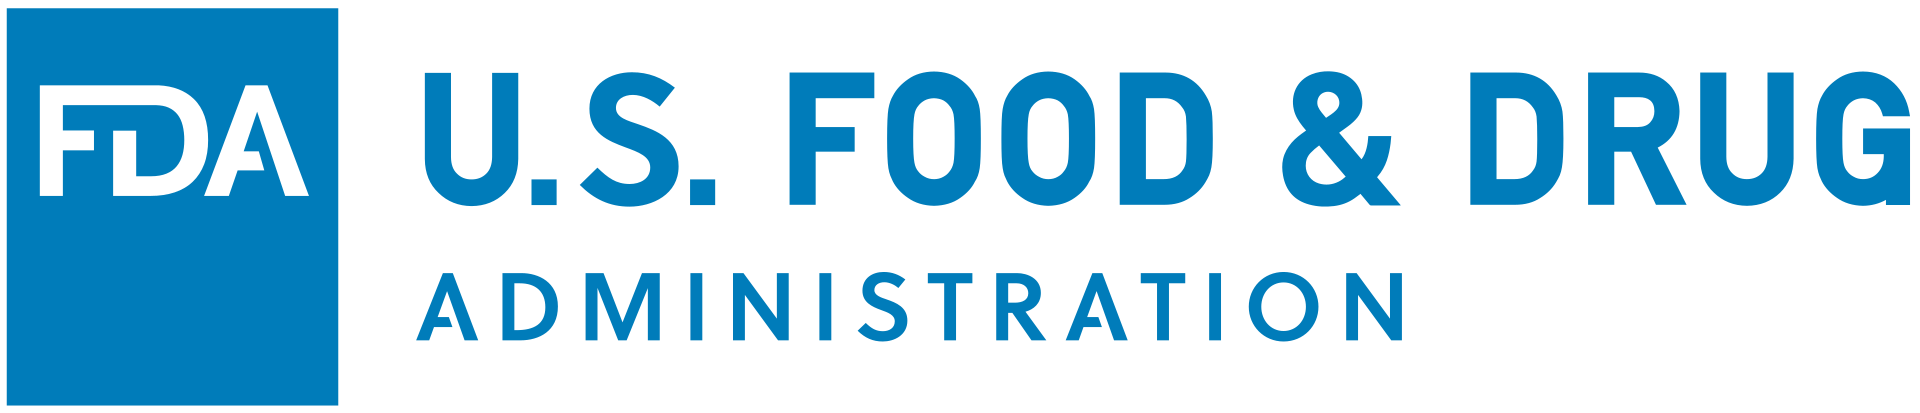 U.S. Food and Drug Administration logo, By Food and Drug Administration - https://www.fda.gov/downloads/AboutFDA/AboutThisWebsite/WebsitePolicies/UCM519160.pdf, Public Domain, https://commons.wikimedia.org/w/index.php?curid=58310575